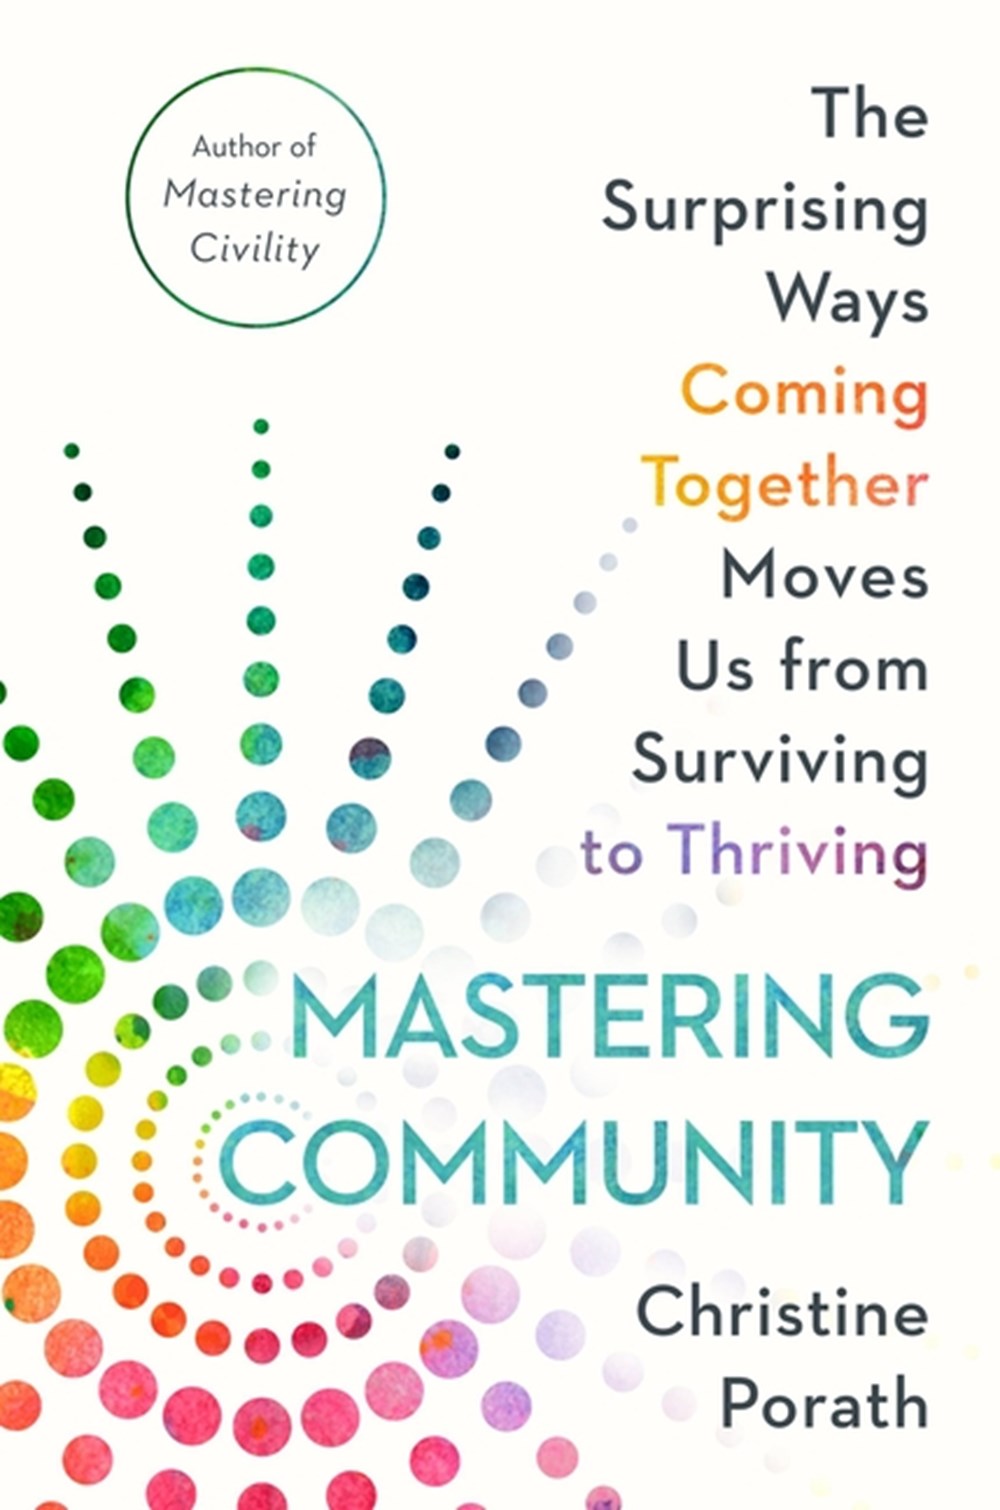 Mastering Community The Surprising Ways Coming Together Moves Us from Surviving to Thriving